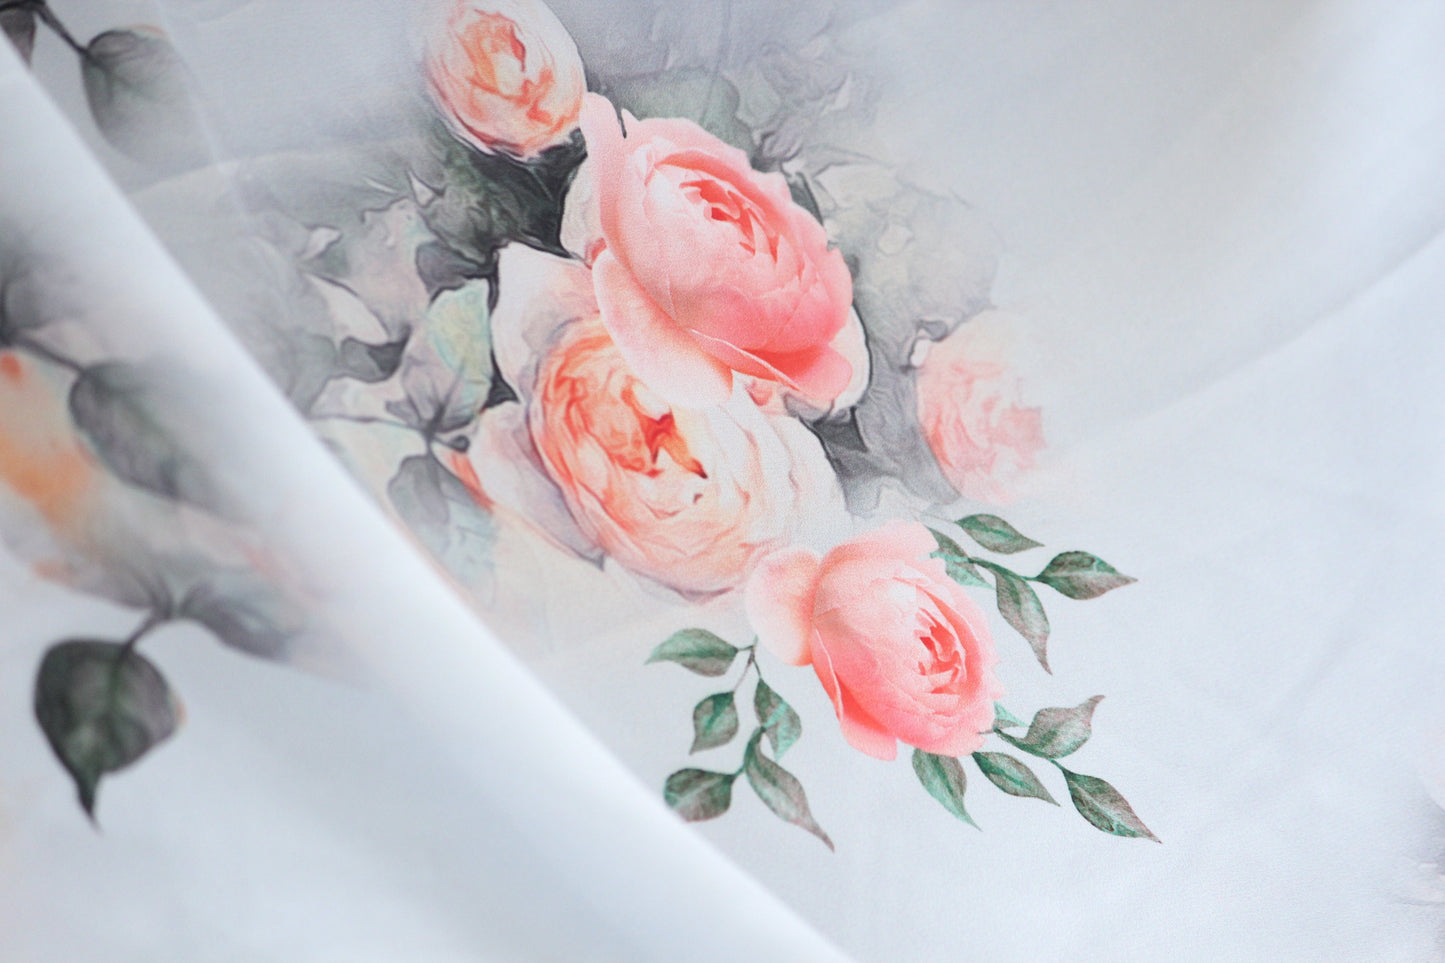 1 yard-Light grey/blue tint with orange water color rose print satin charmeuse- grey leaf and stunning rose satin fabric-best seller